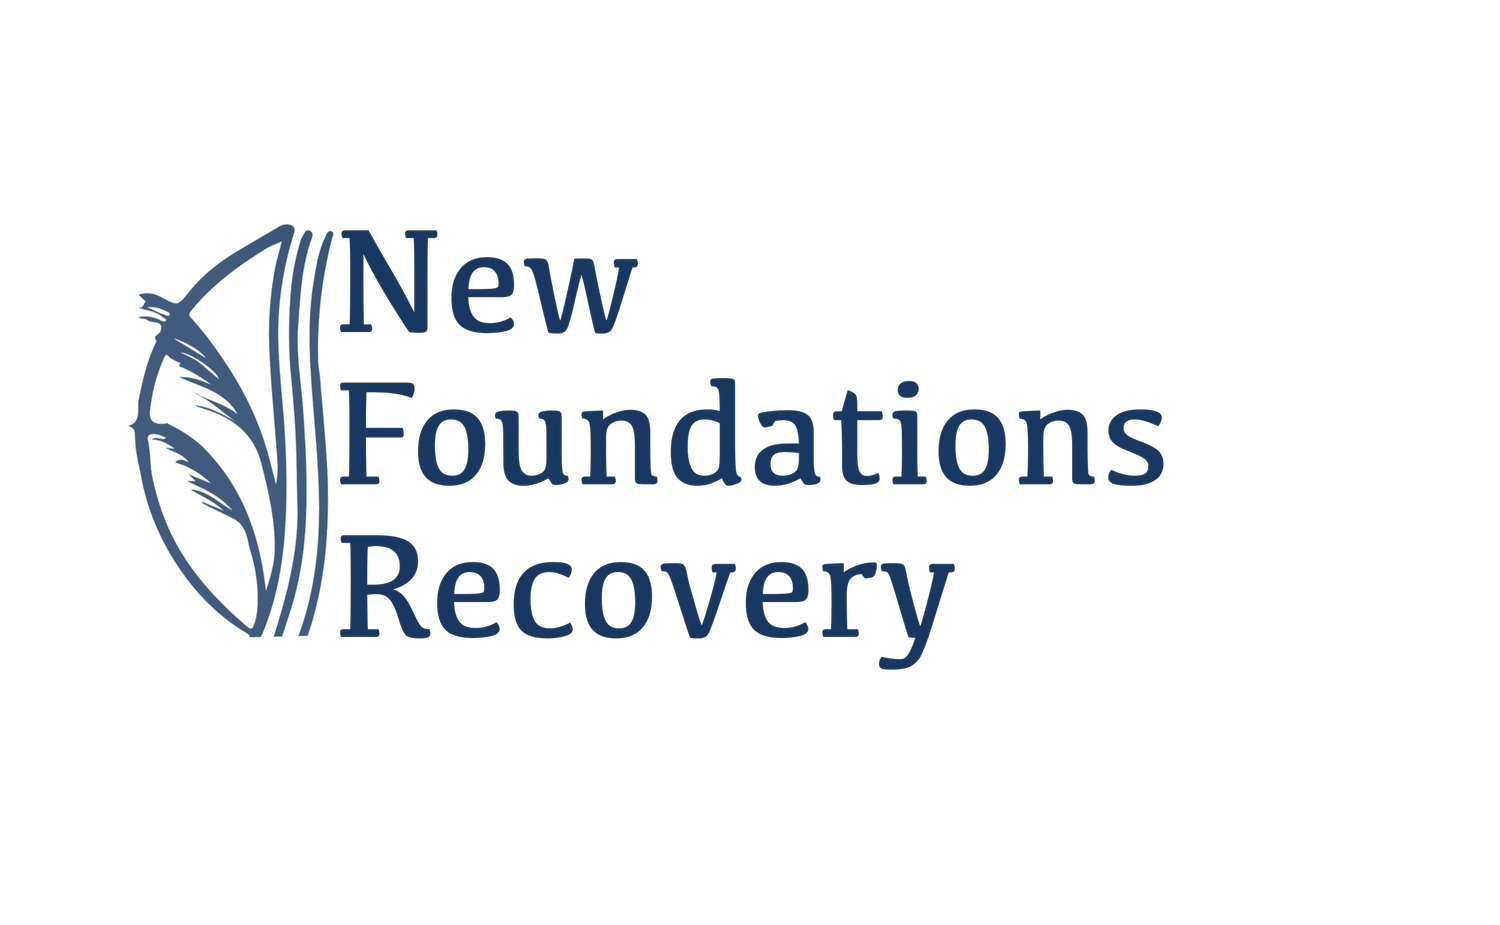 New Foundations Recovery LLC